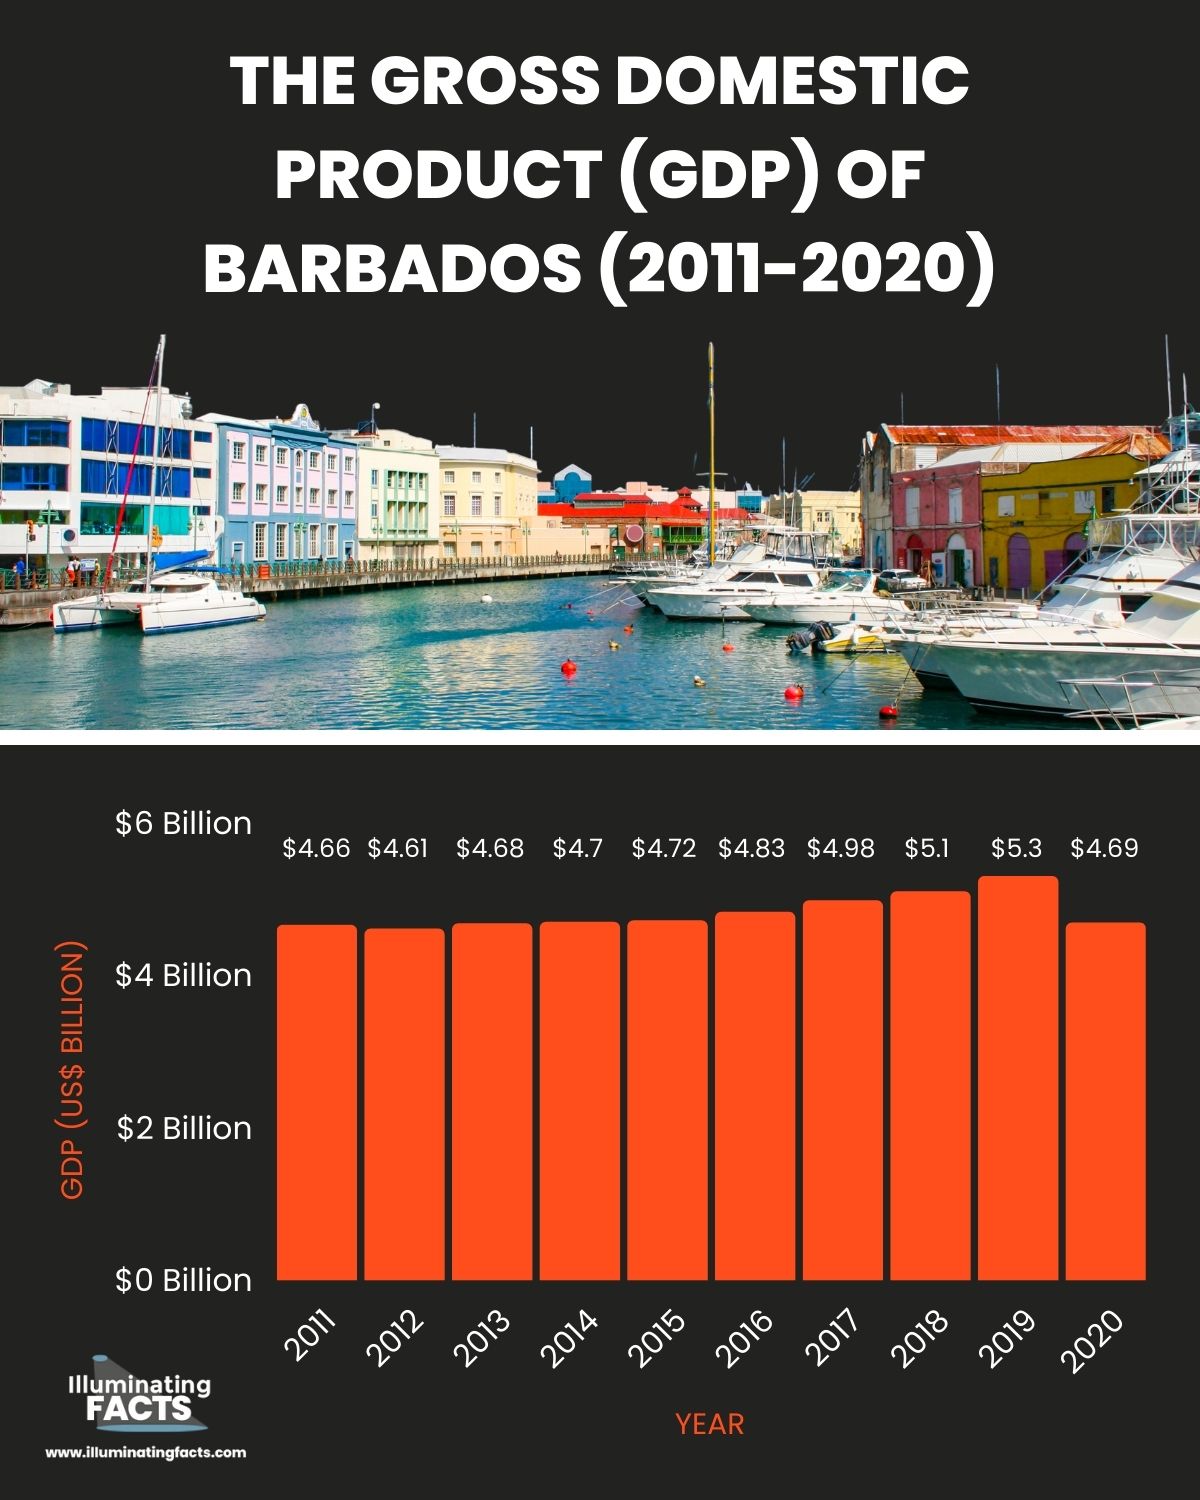 The Gross Domestic Product (GDP) of Barbados (2011-2020)